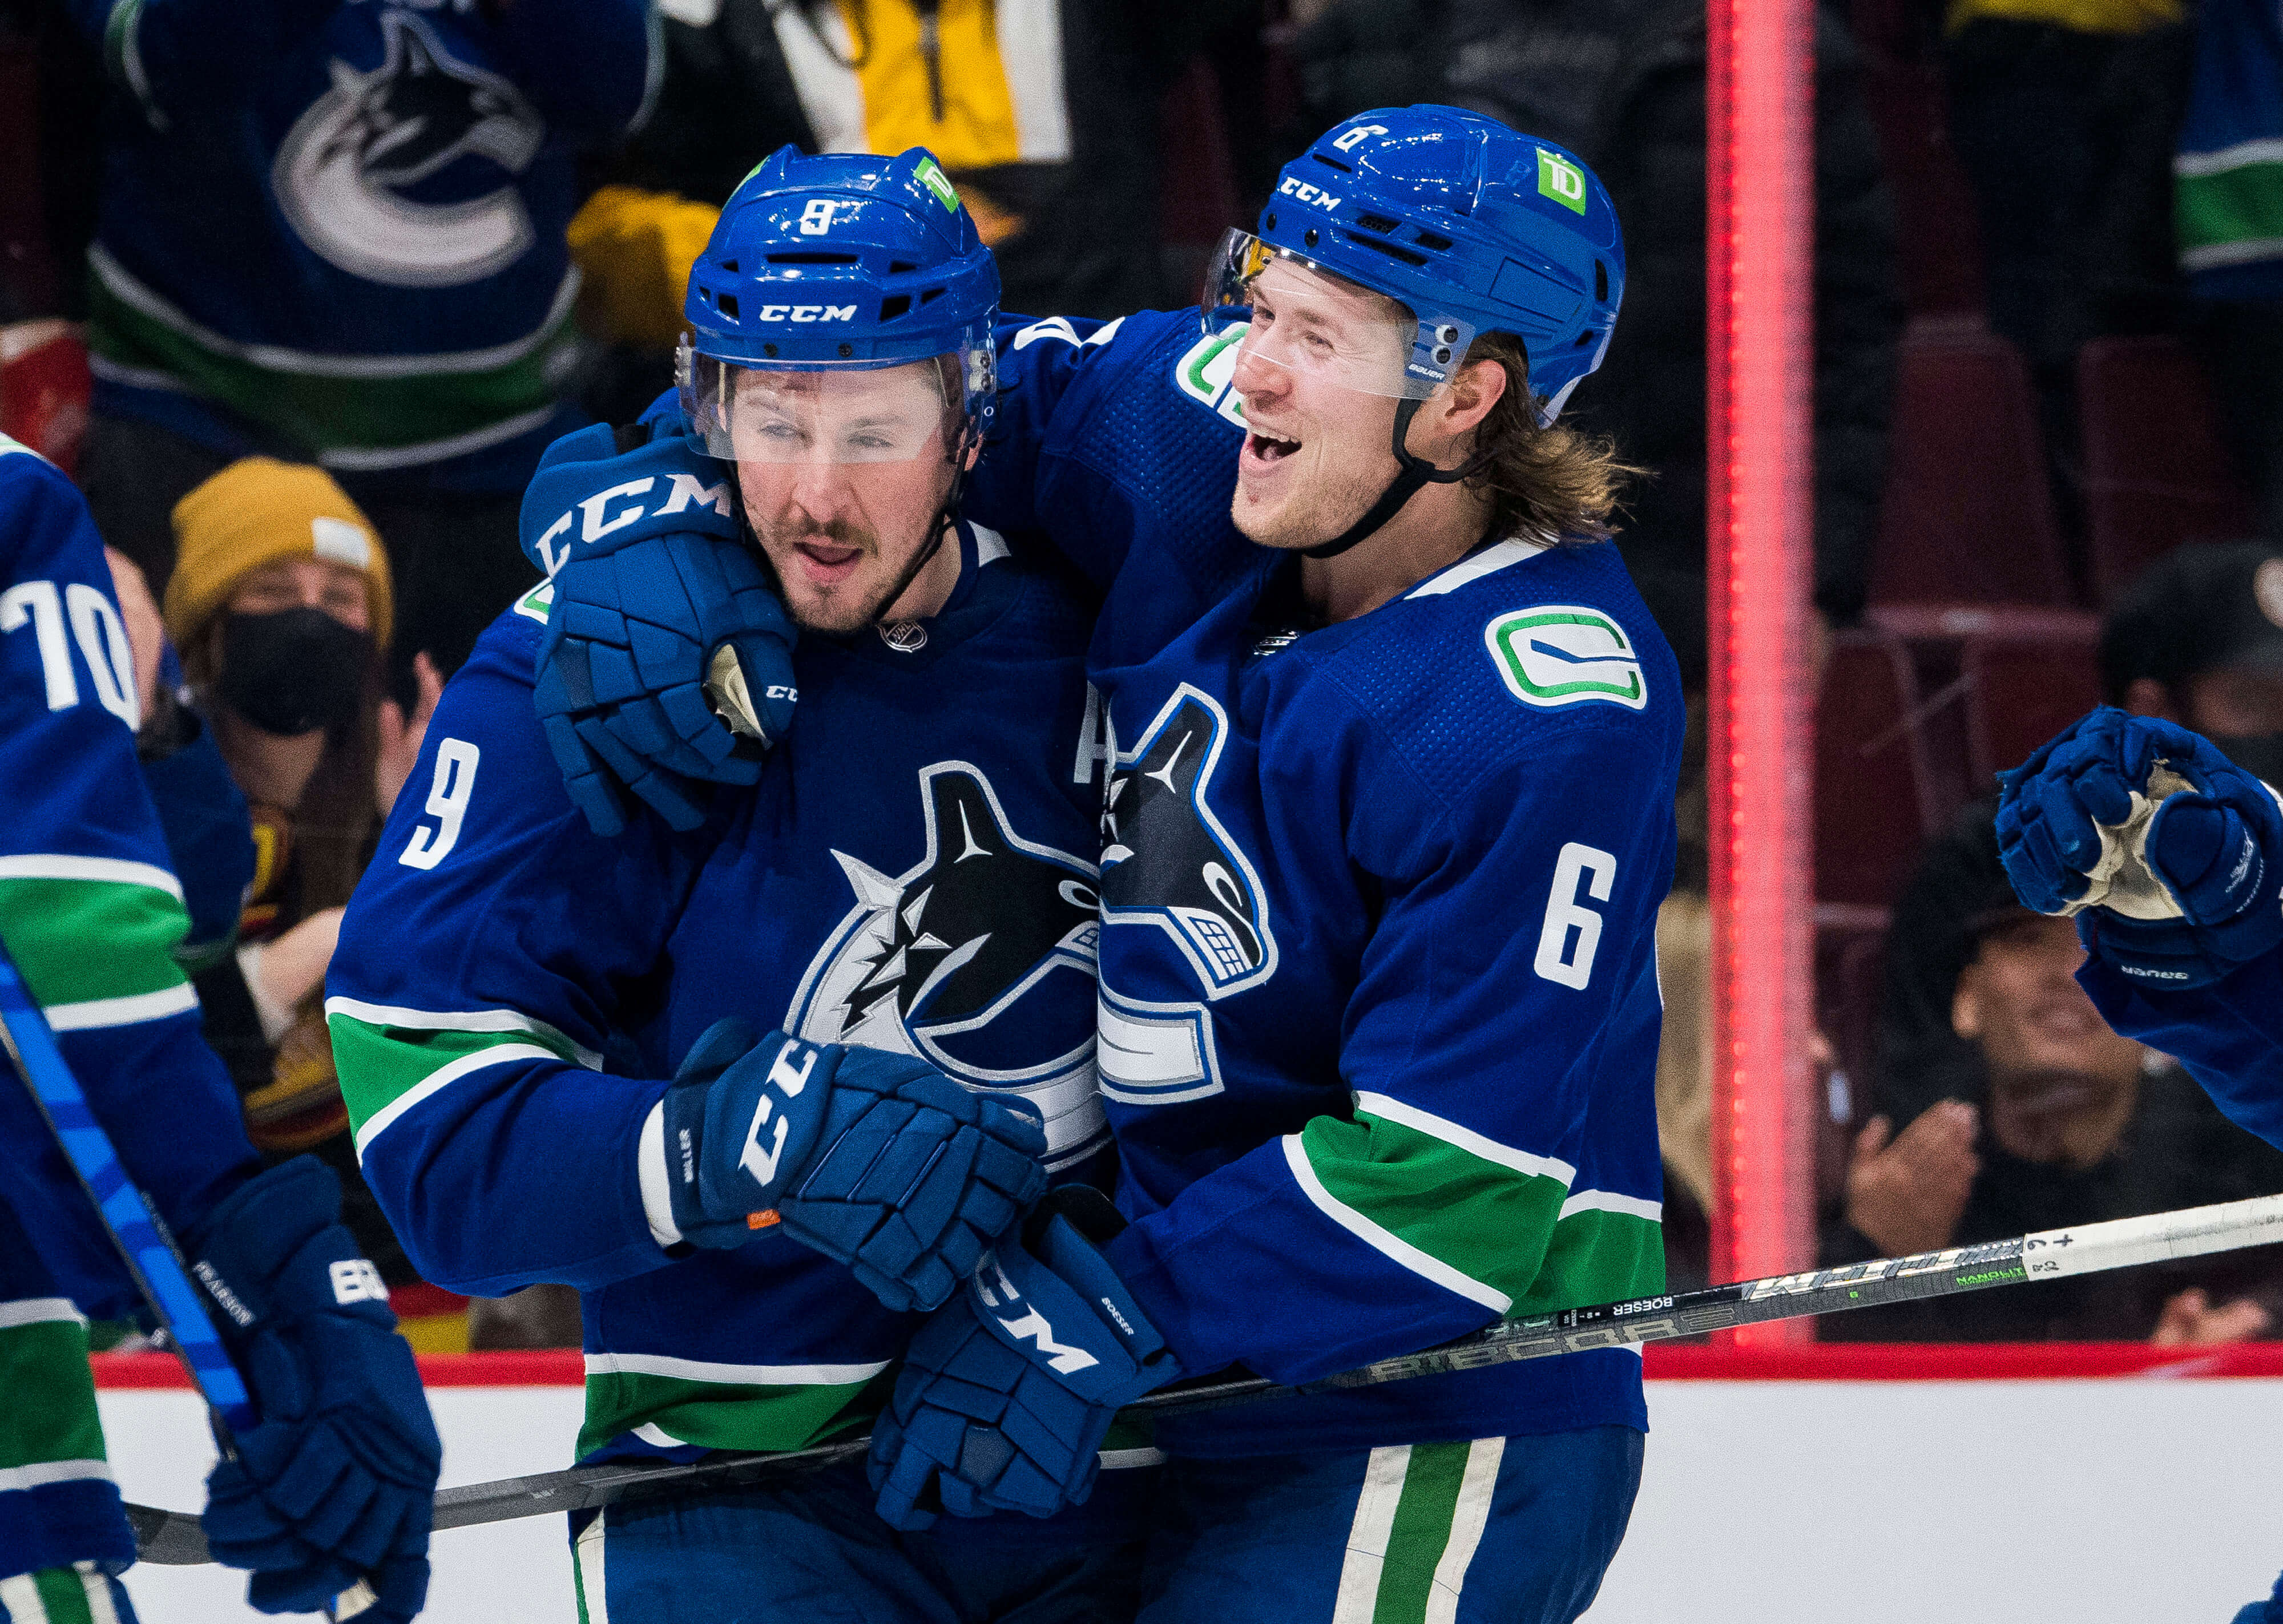 Report: Canucks setting themselves up to make major move ahead of the trade deadline